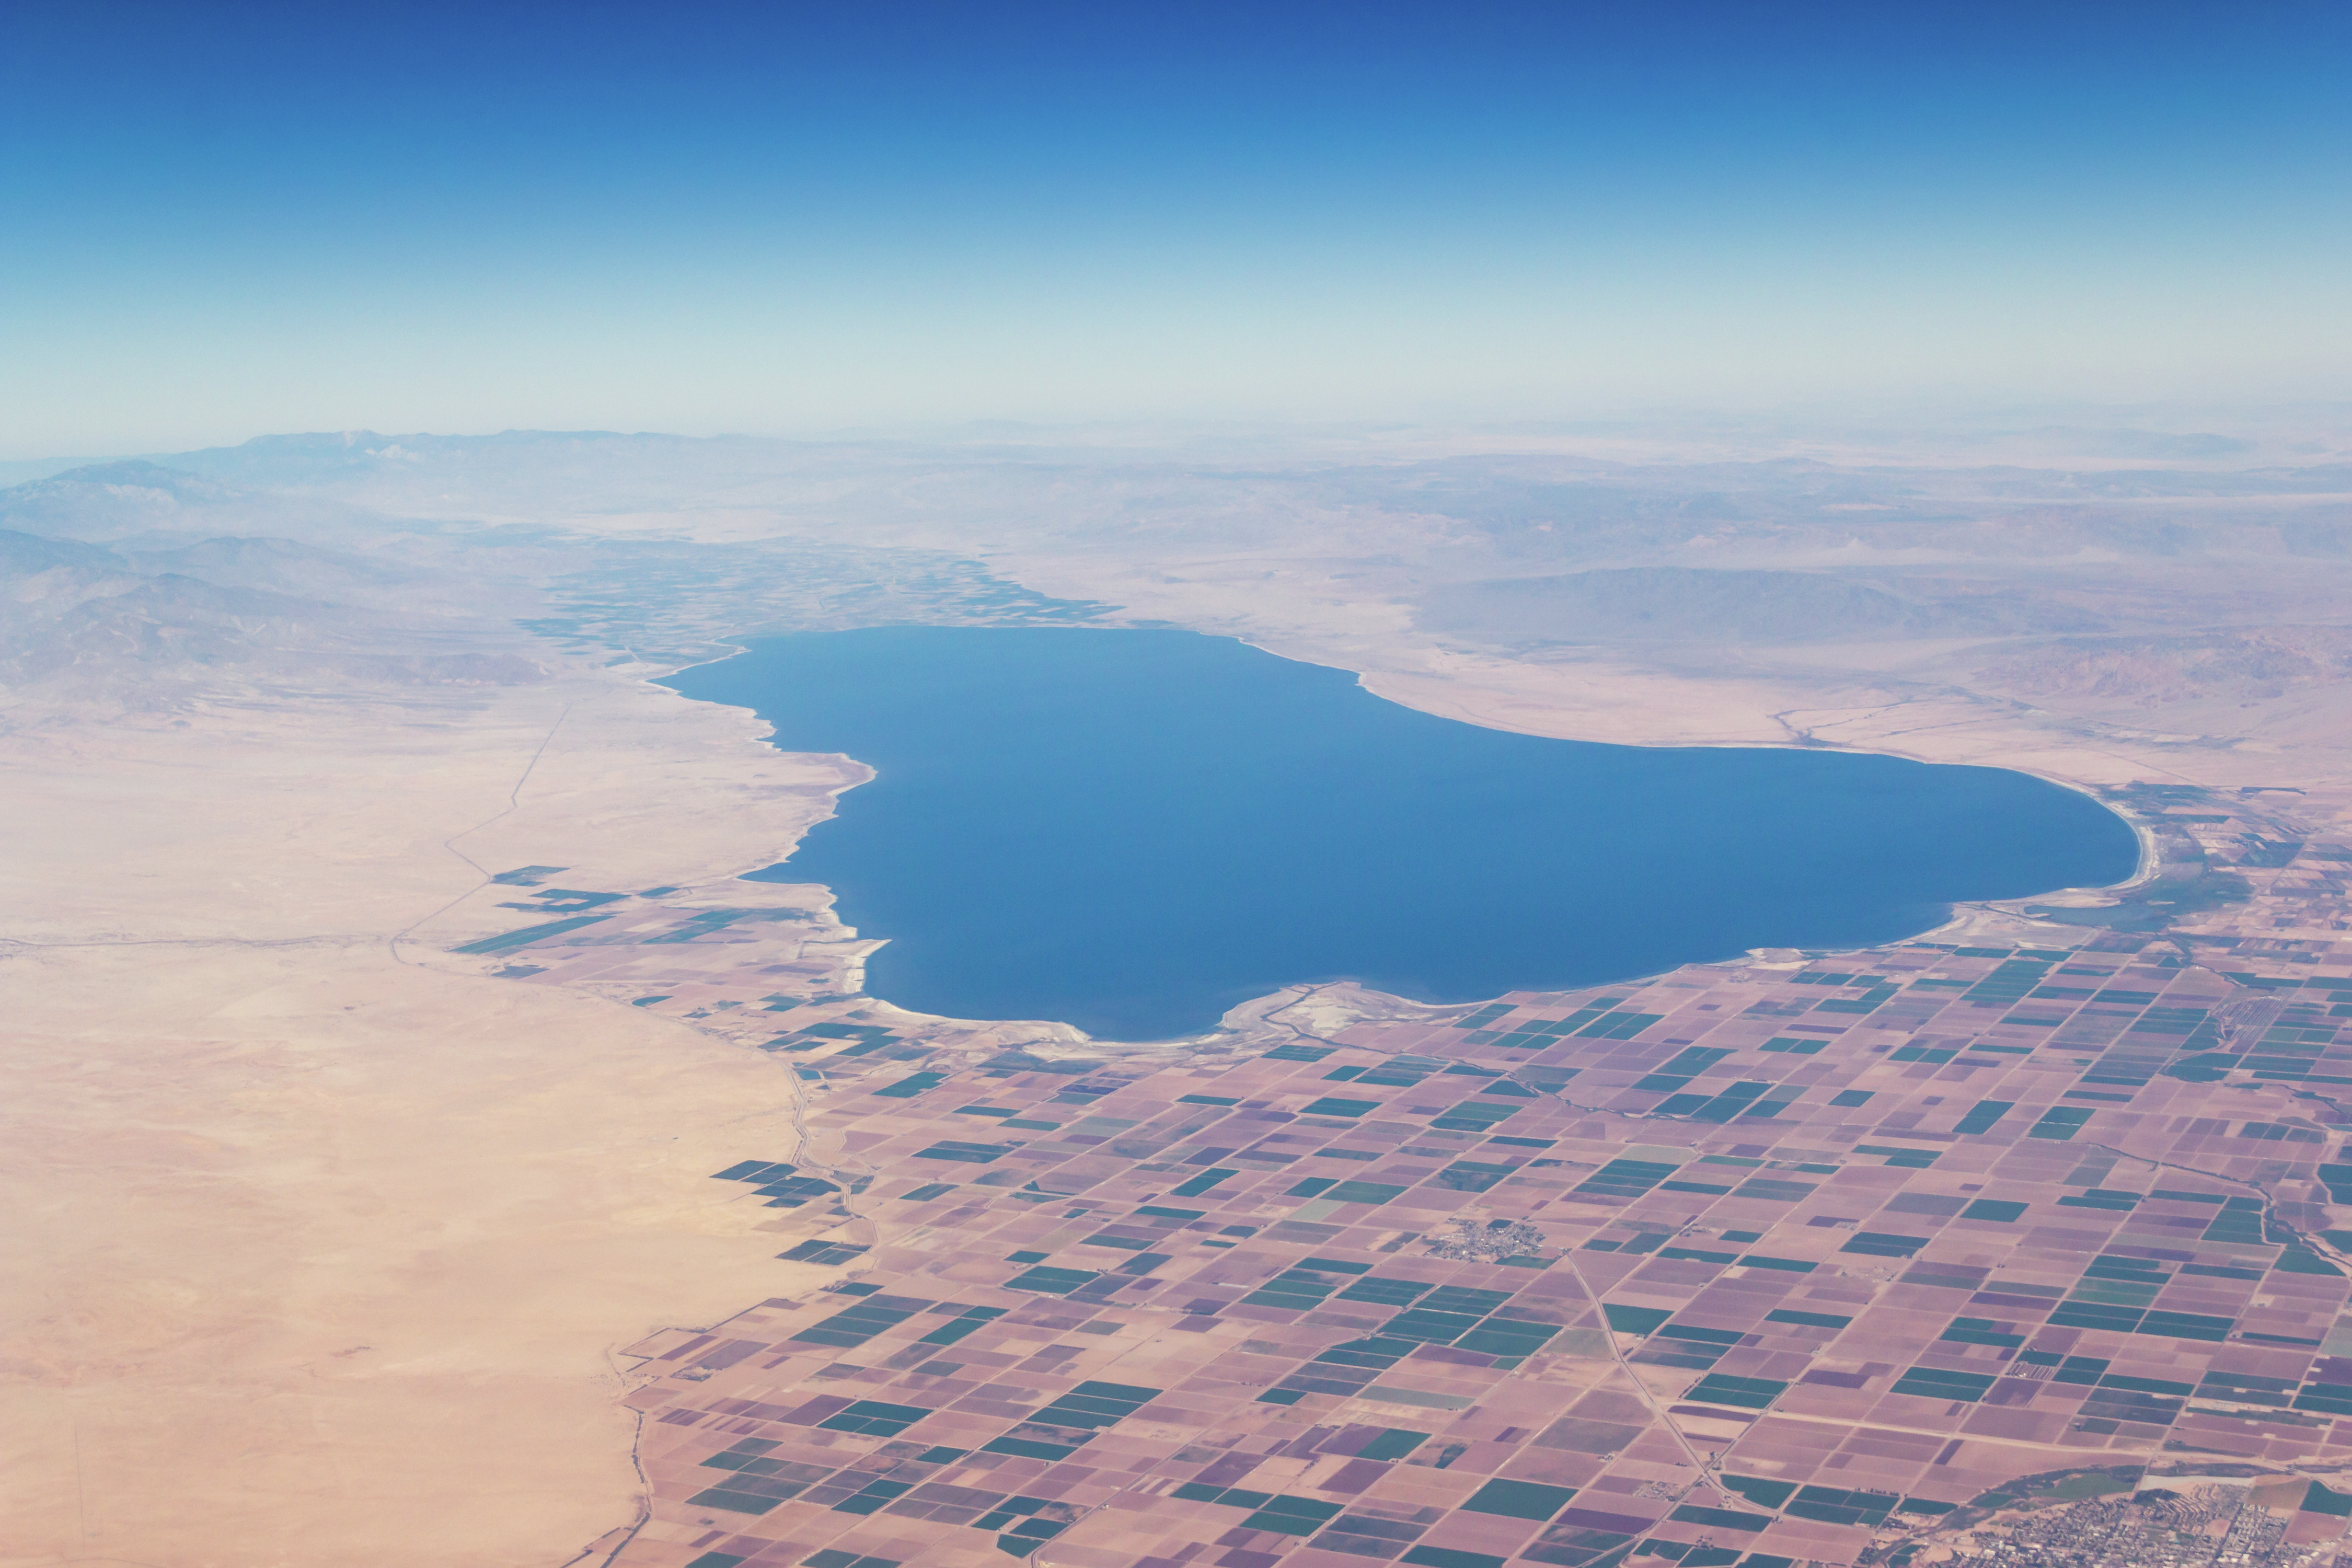 Salton Sea continues to shrink, leaving behind harmful particulates